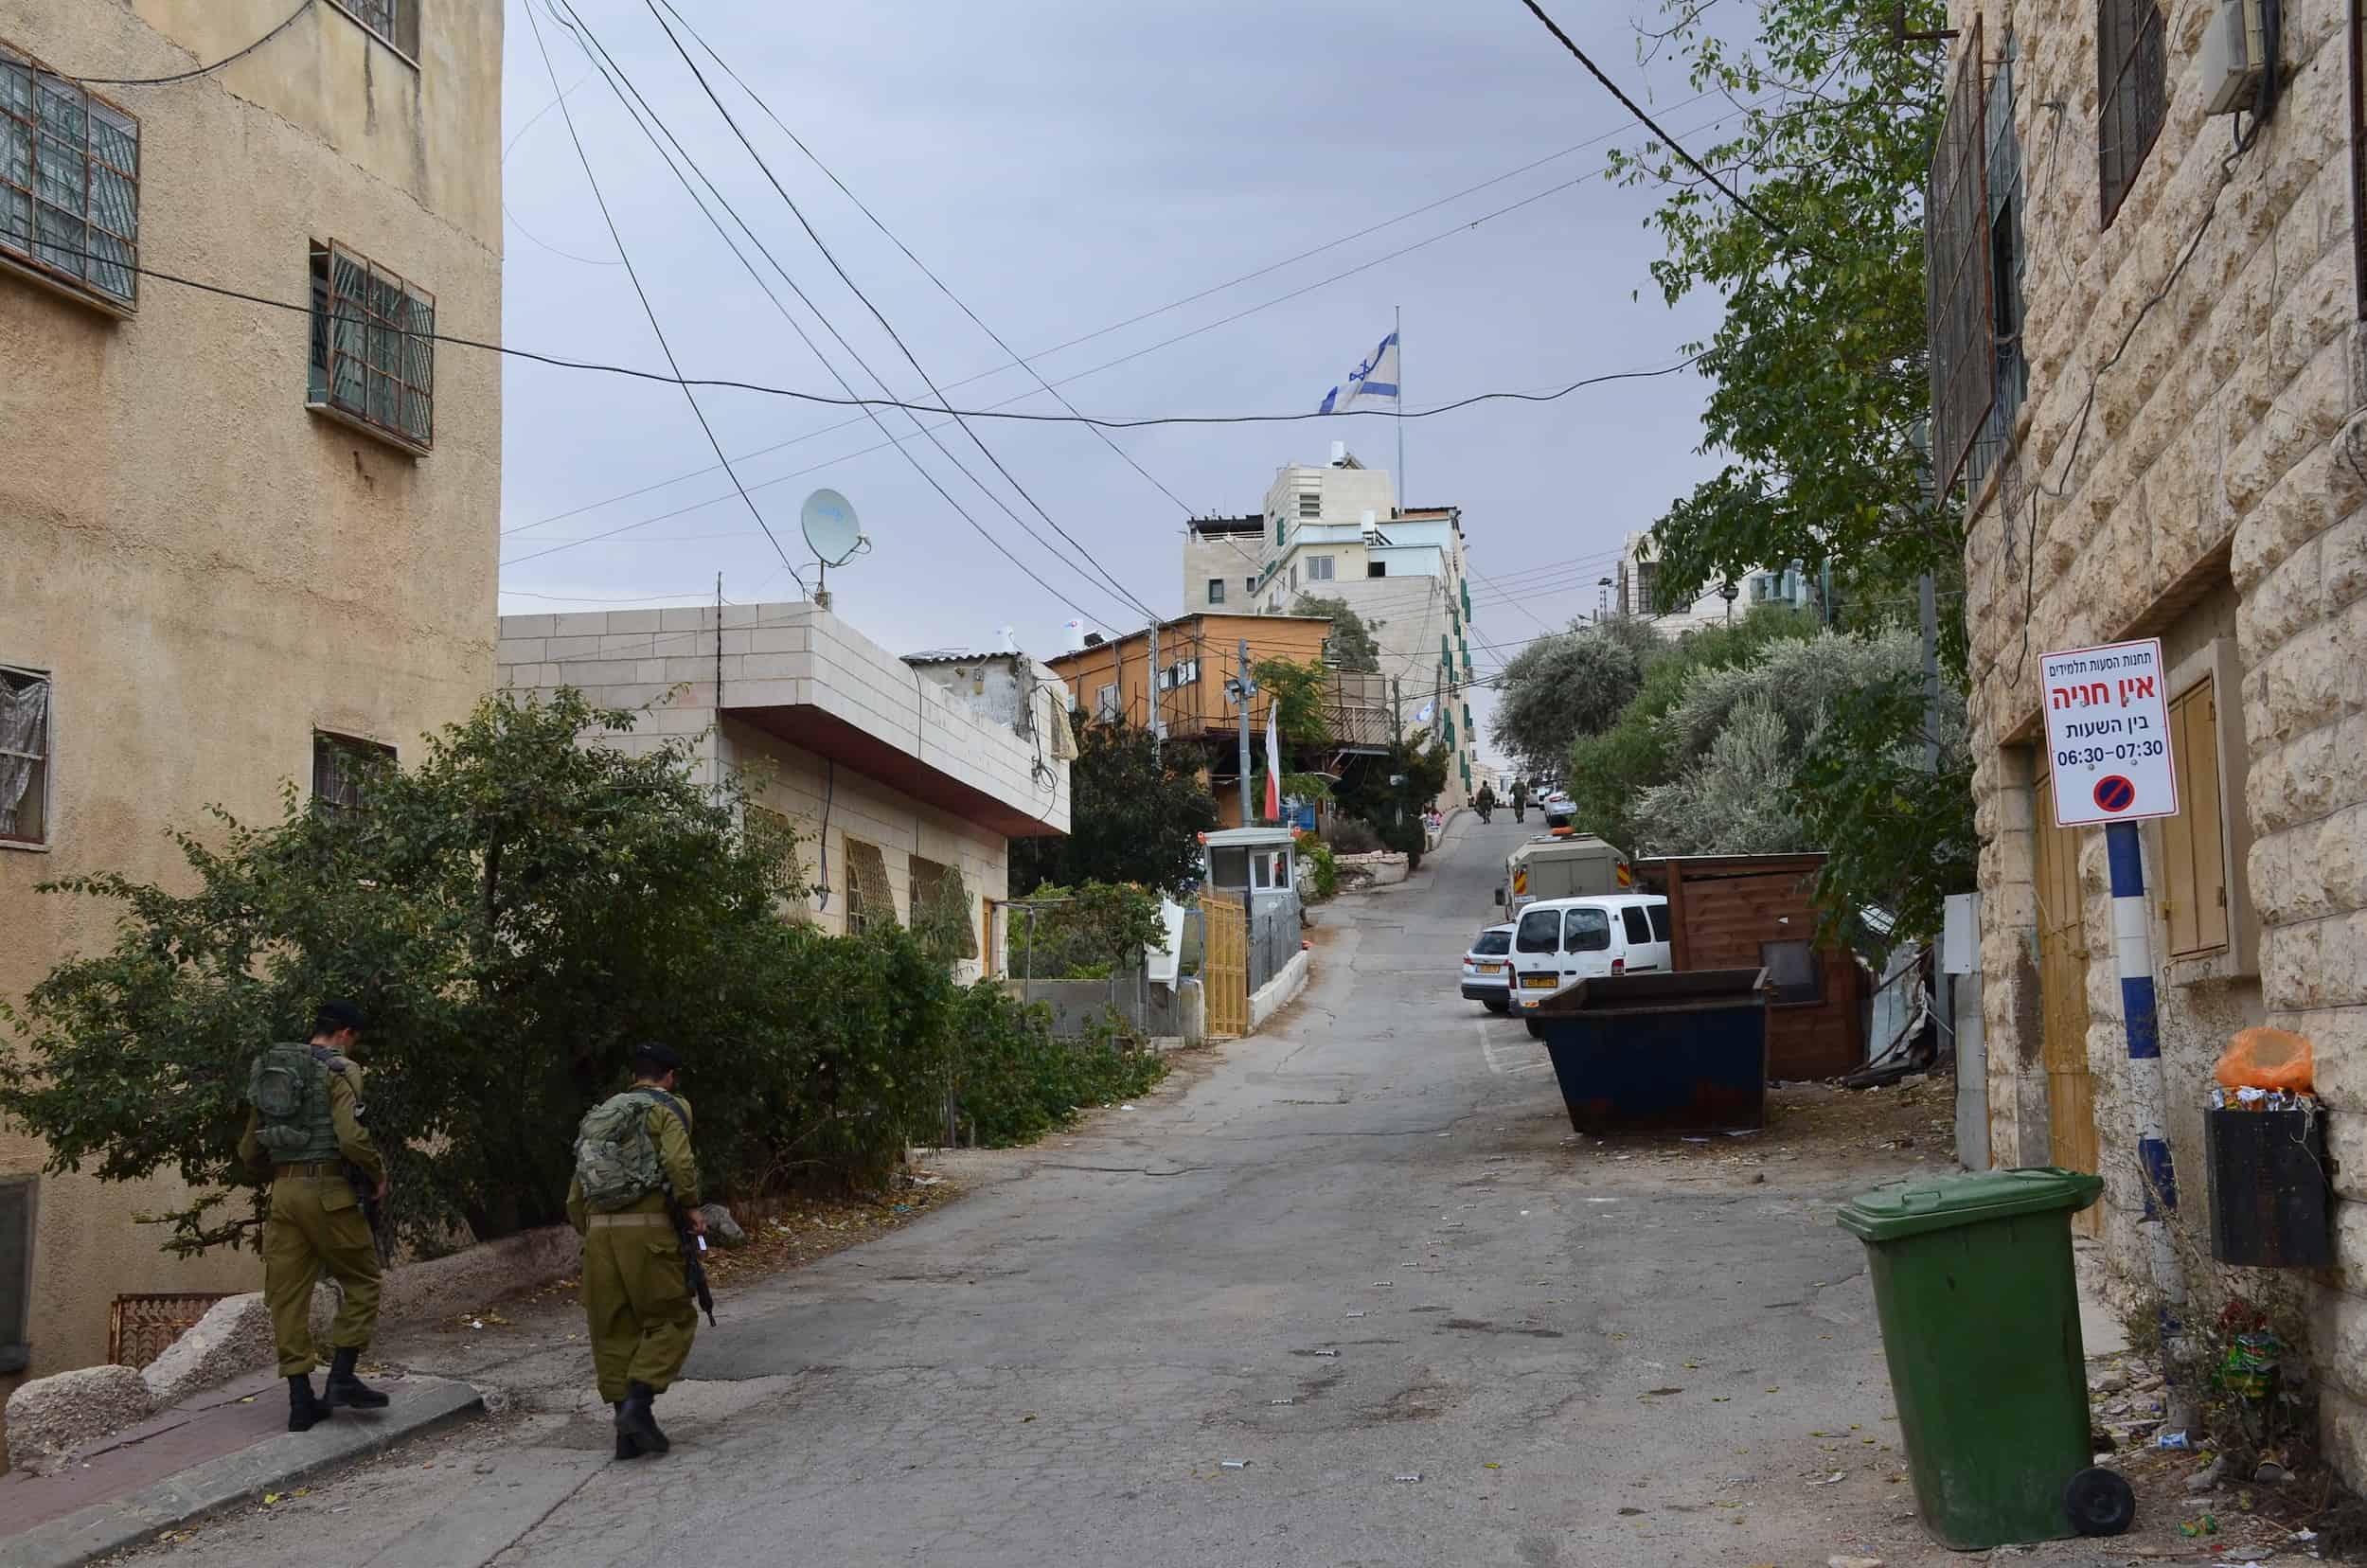 Road up to the Tel Rumeida settlement in Hebron, Palestine